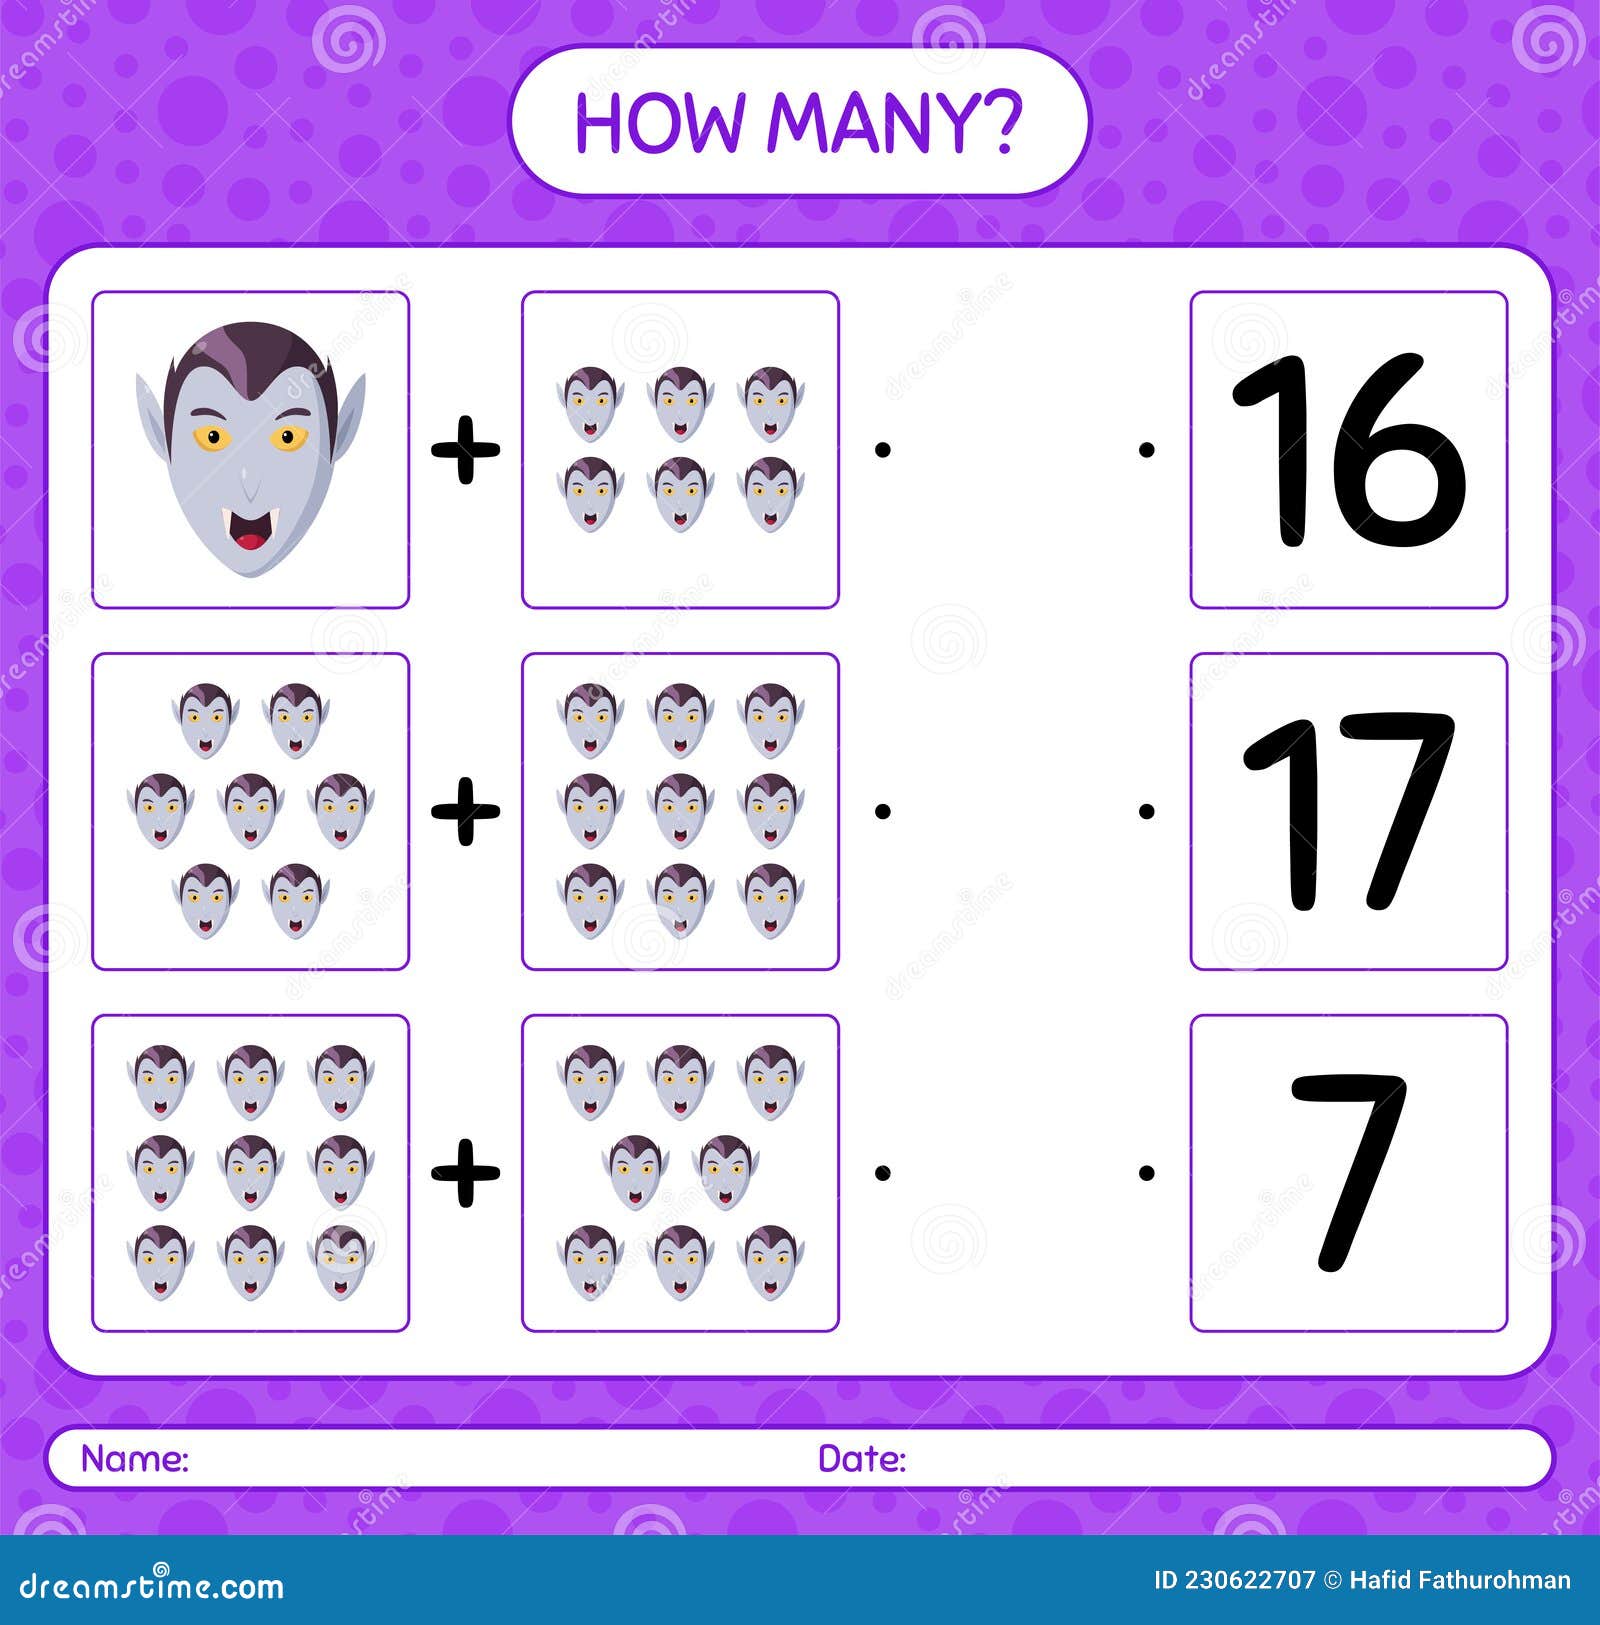 how-many-counting-game-with-vampire-worksheet-for-preschool-kids-kids-activity-sheet-stock